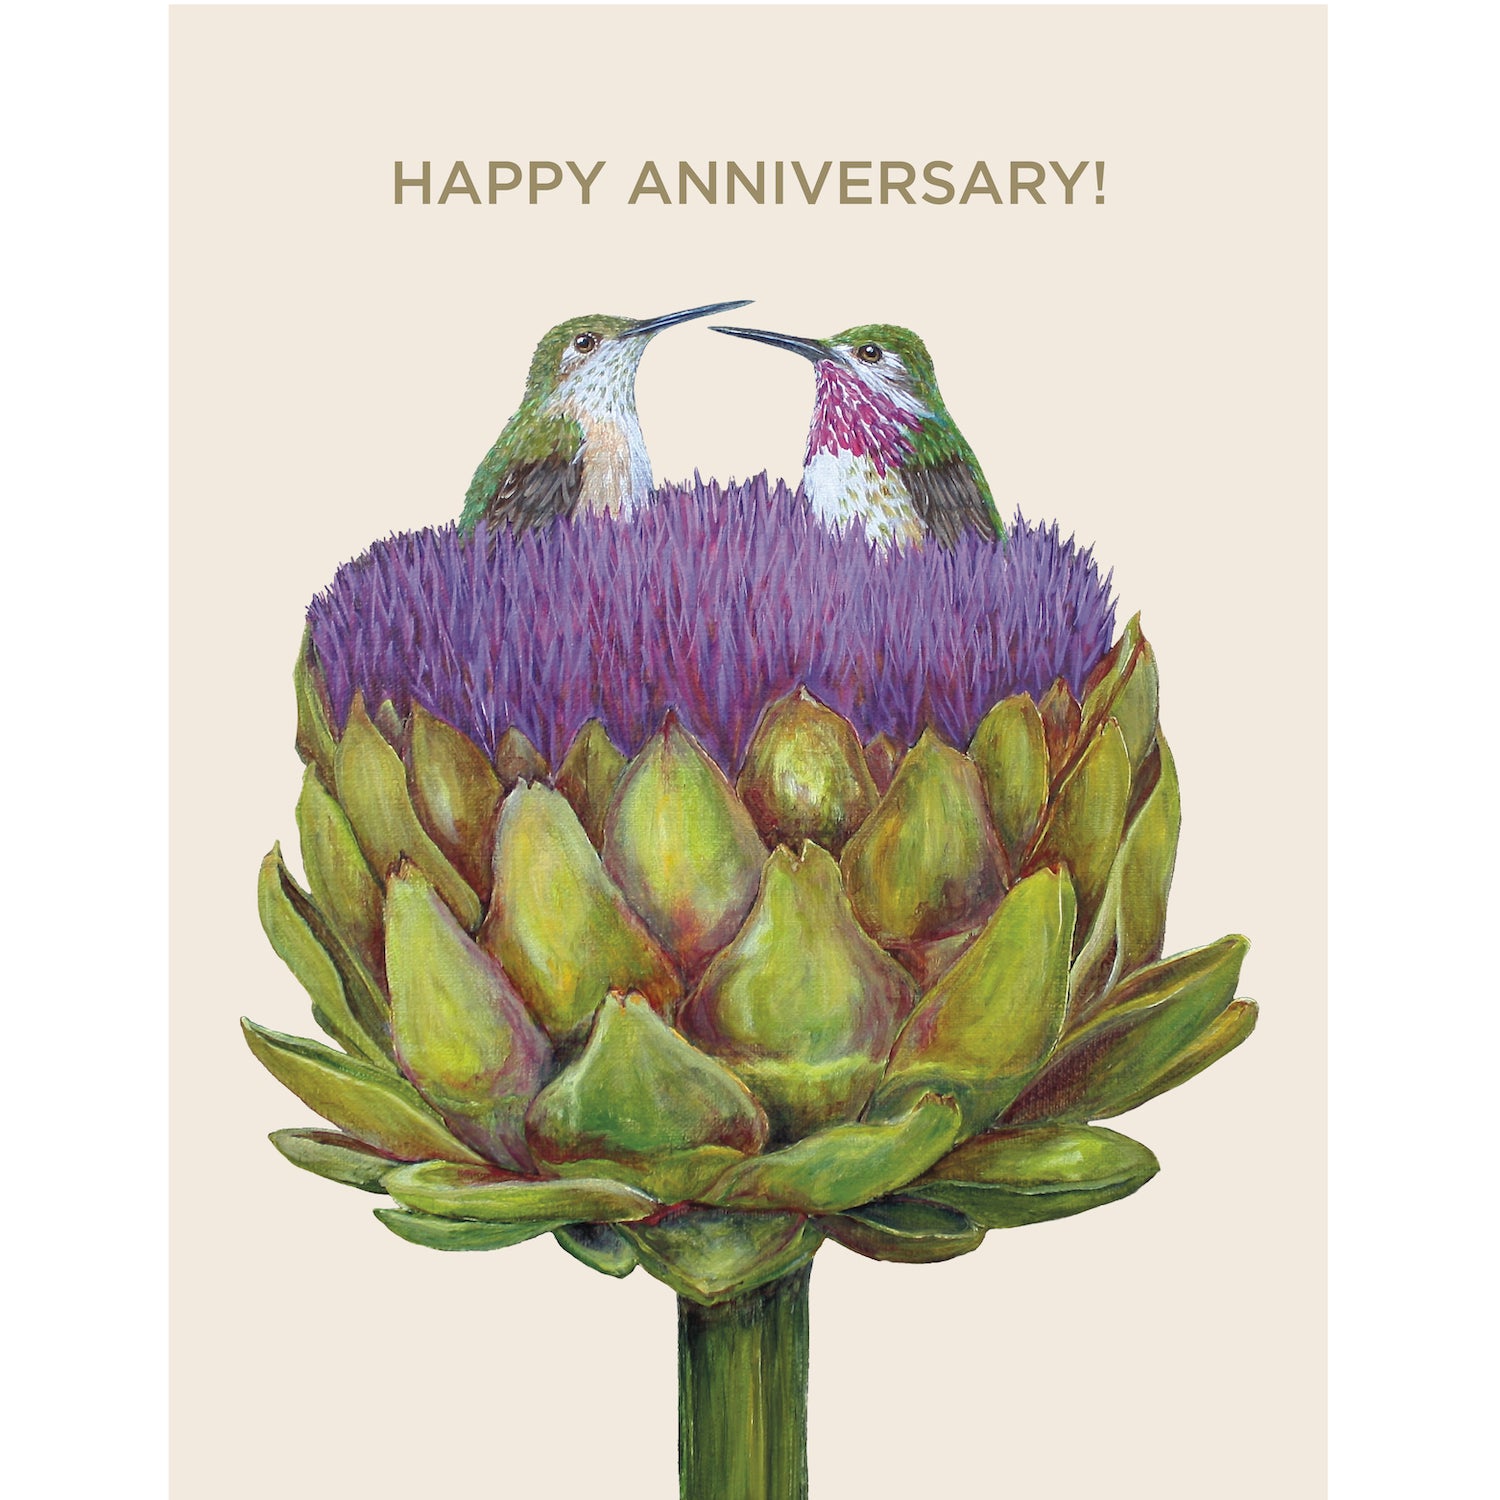 Two Anniversary Hummingbirds on a Hester &amp; Cook artichoke flower card.